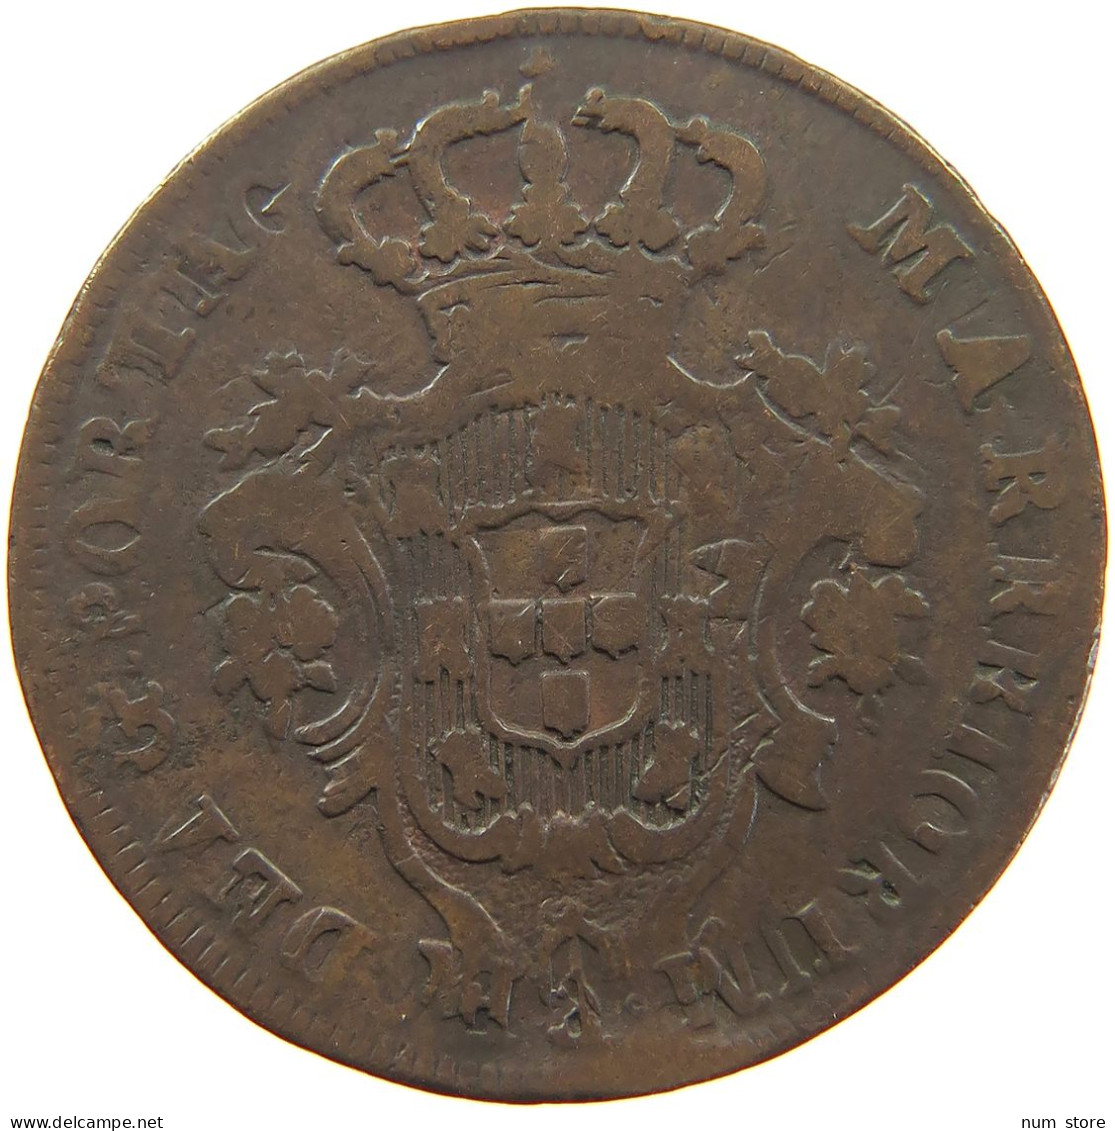 AZORES 10 REIS 1799 Maria I. (1786-1799) BOTH SIDES OVERSTUCK #t015 0579 - Azores